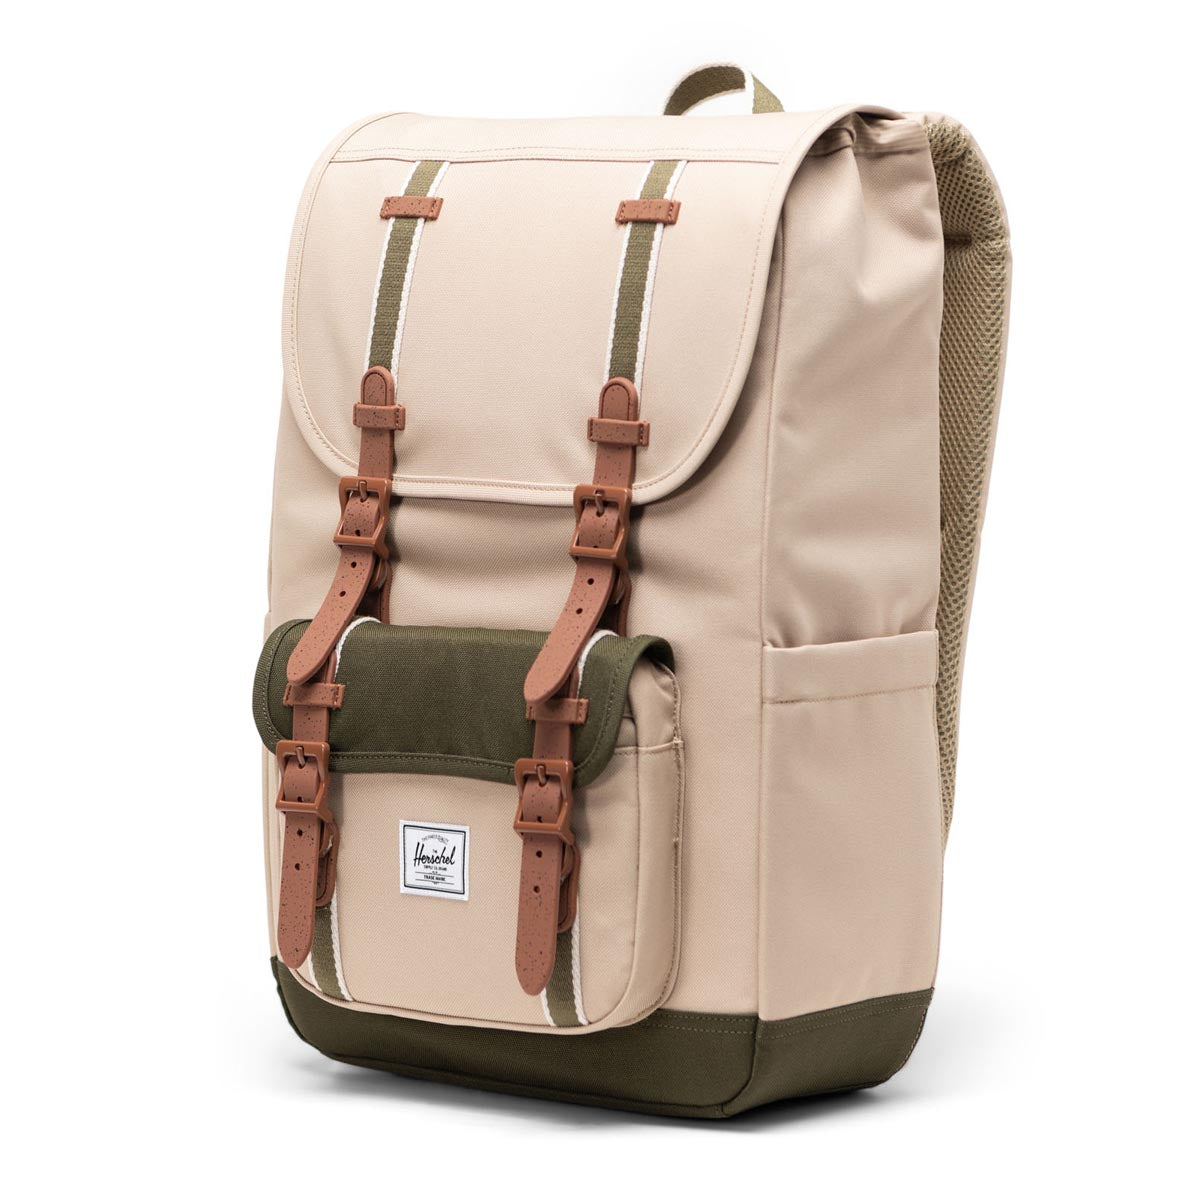 Herschel Supply Little America Mid Backpack - Twill/Ivy Green image 3